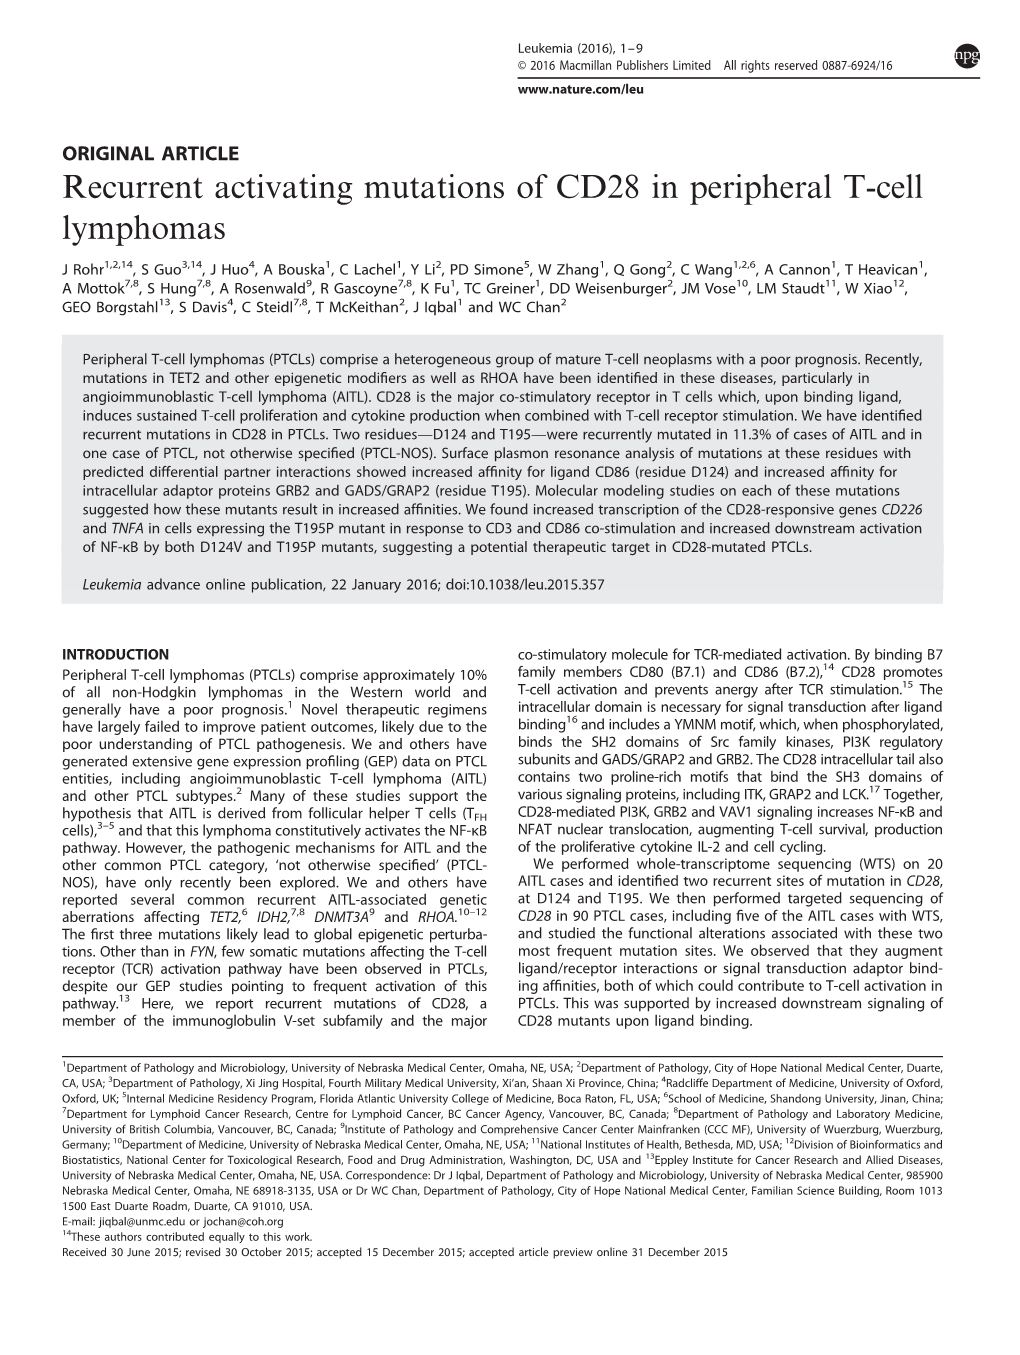 Recurrent Activating Mutations of CD28 in Peripheral T-Cell Lymphomas